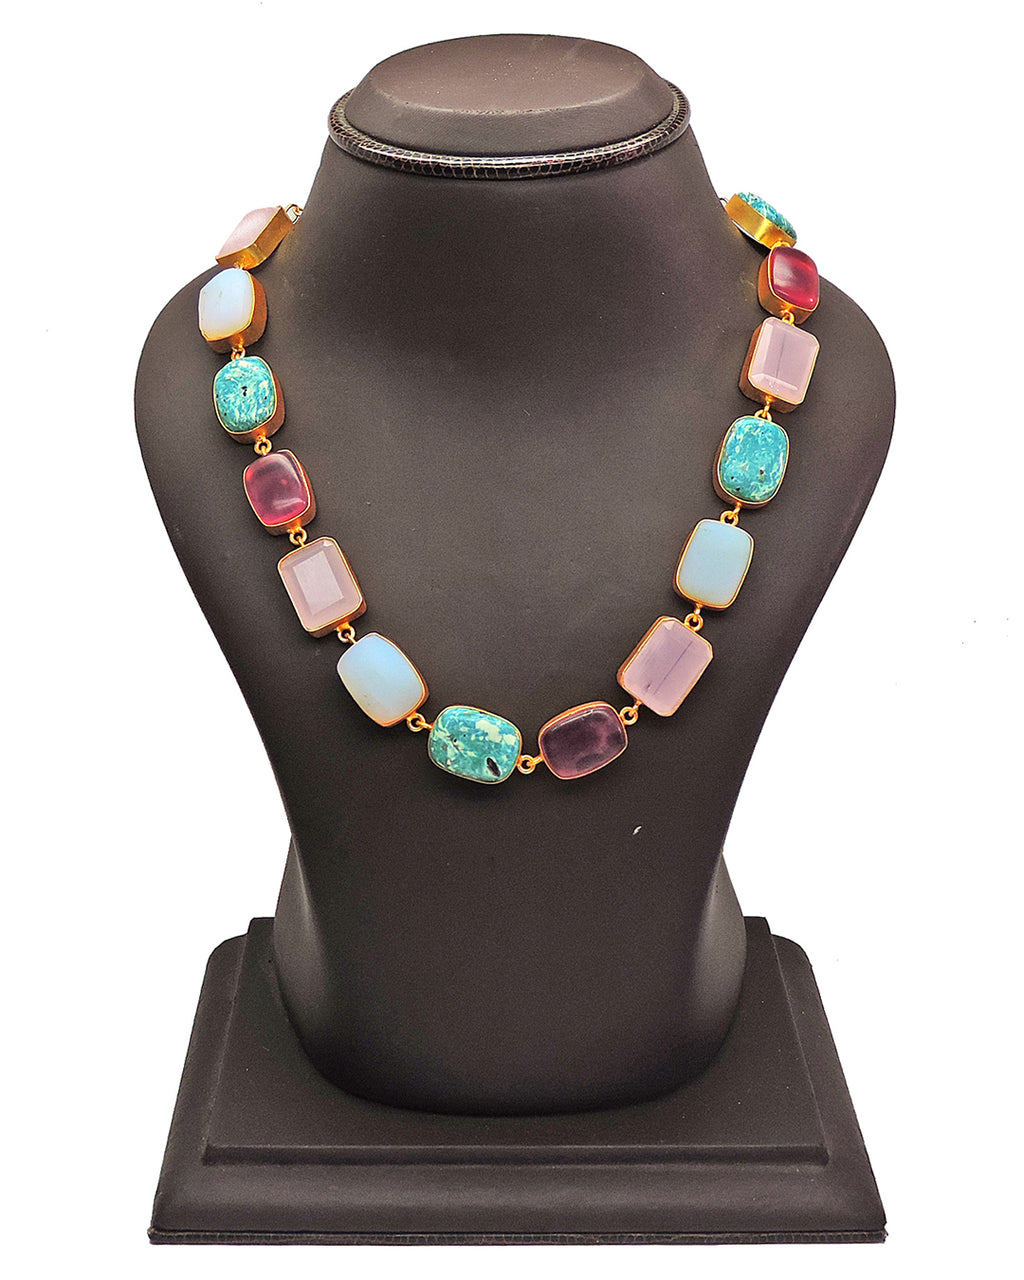 Amani Necklace - Statement Necklaces - Gold-Plated & Hypoallergenic Jewellery - Made in India - Dubai Jewellery - Dori